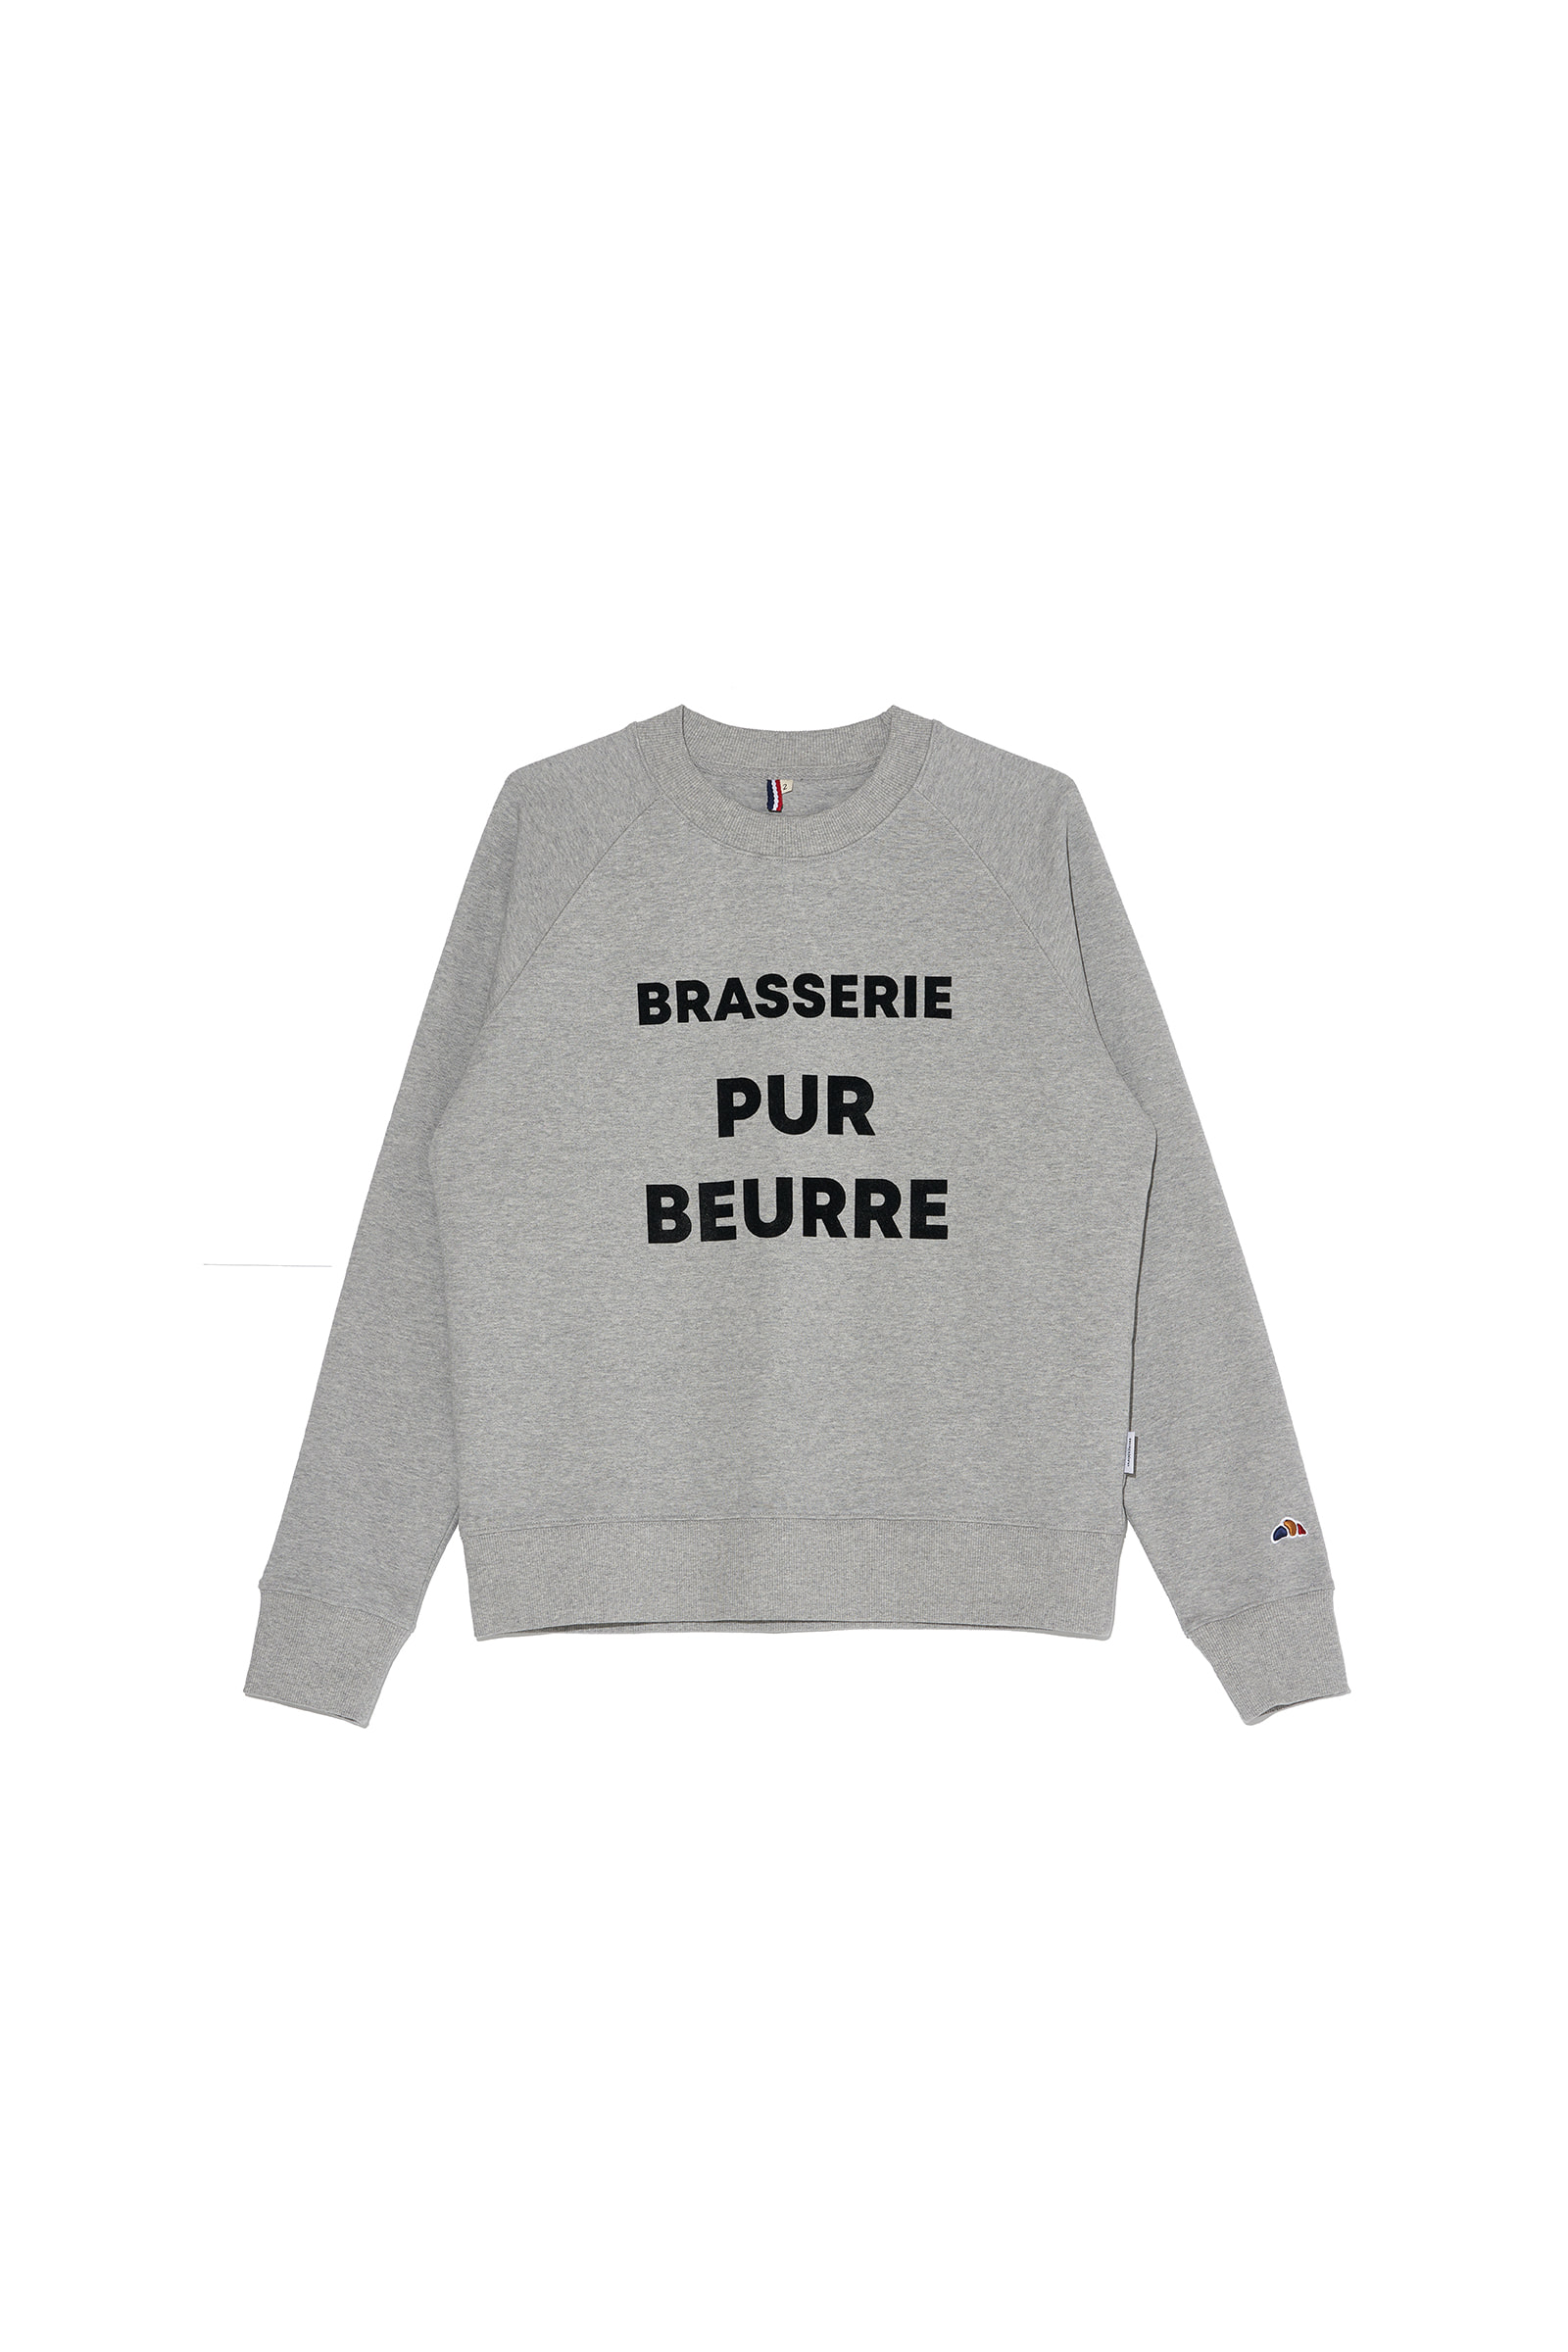 ep.6 BRASSERIE PUR BEURRE lettering sweatshirts (Gray)